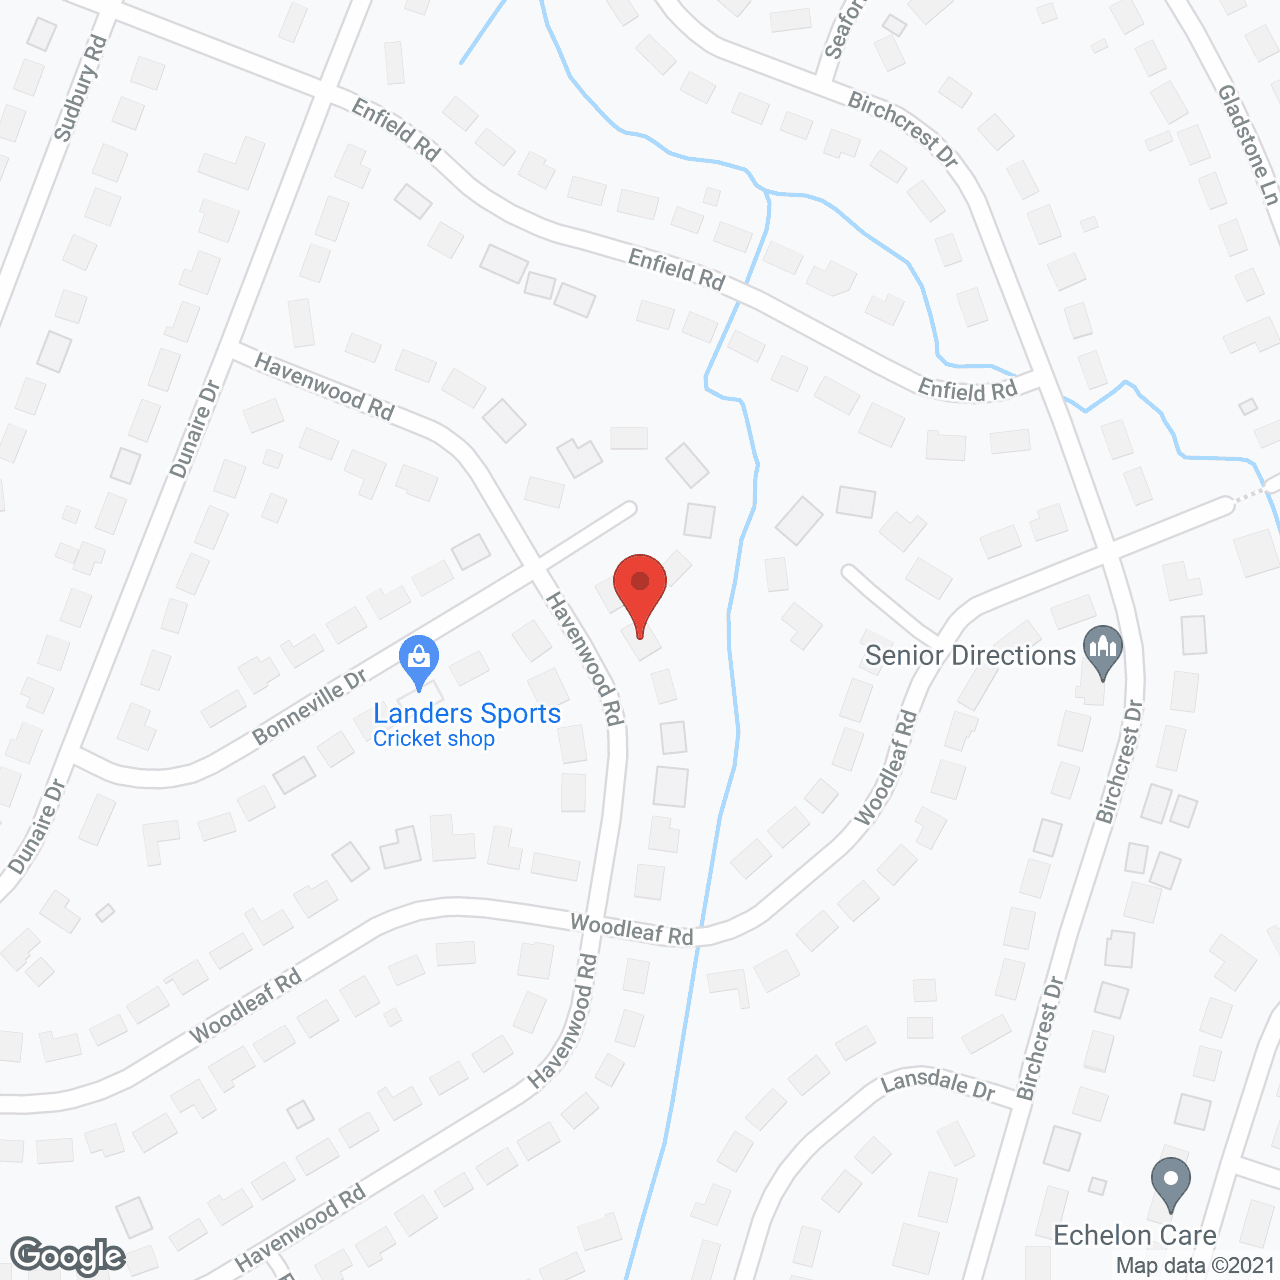 Grant Adult Care Home in google map